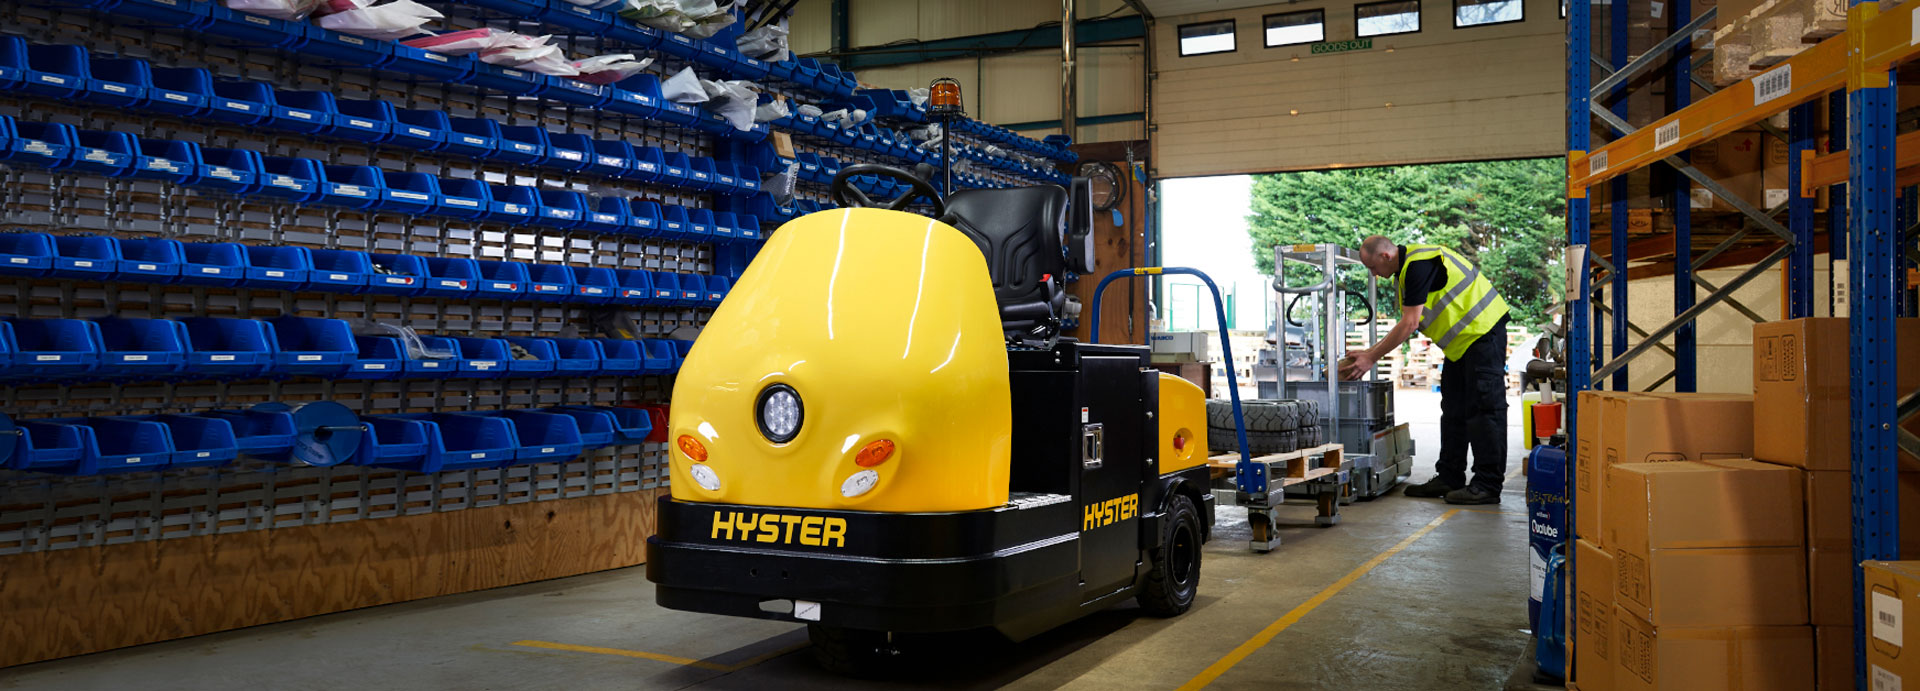 Hyster T7.0 HS3, T8.0 HS4 Tow Tractor